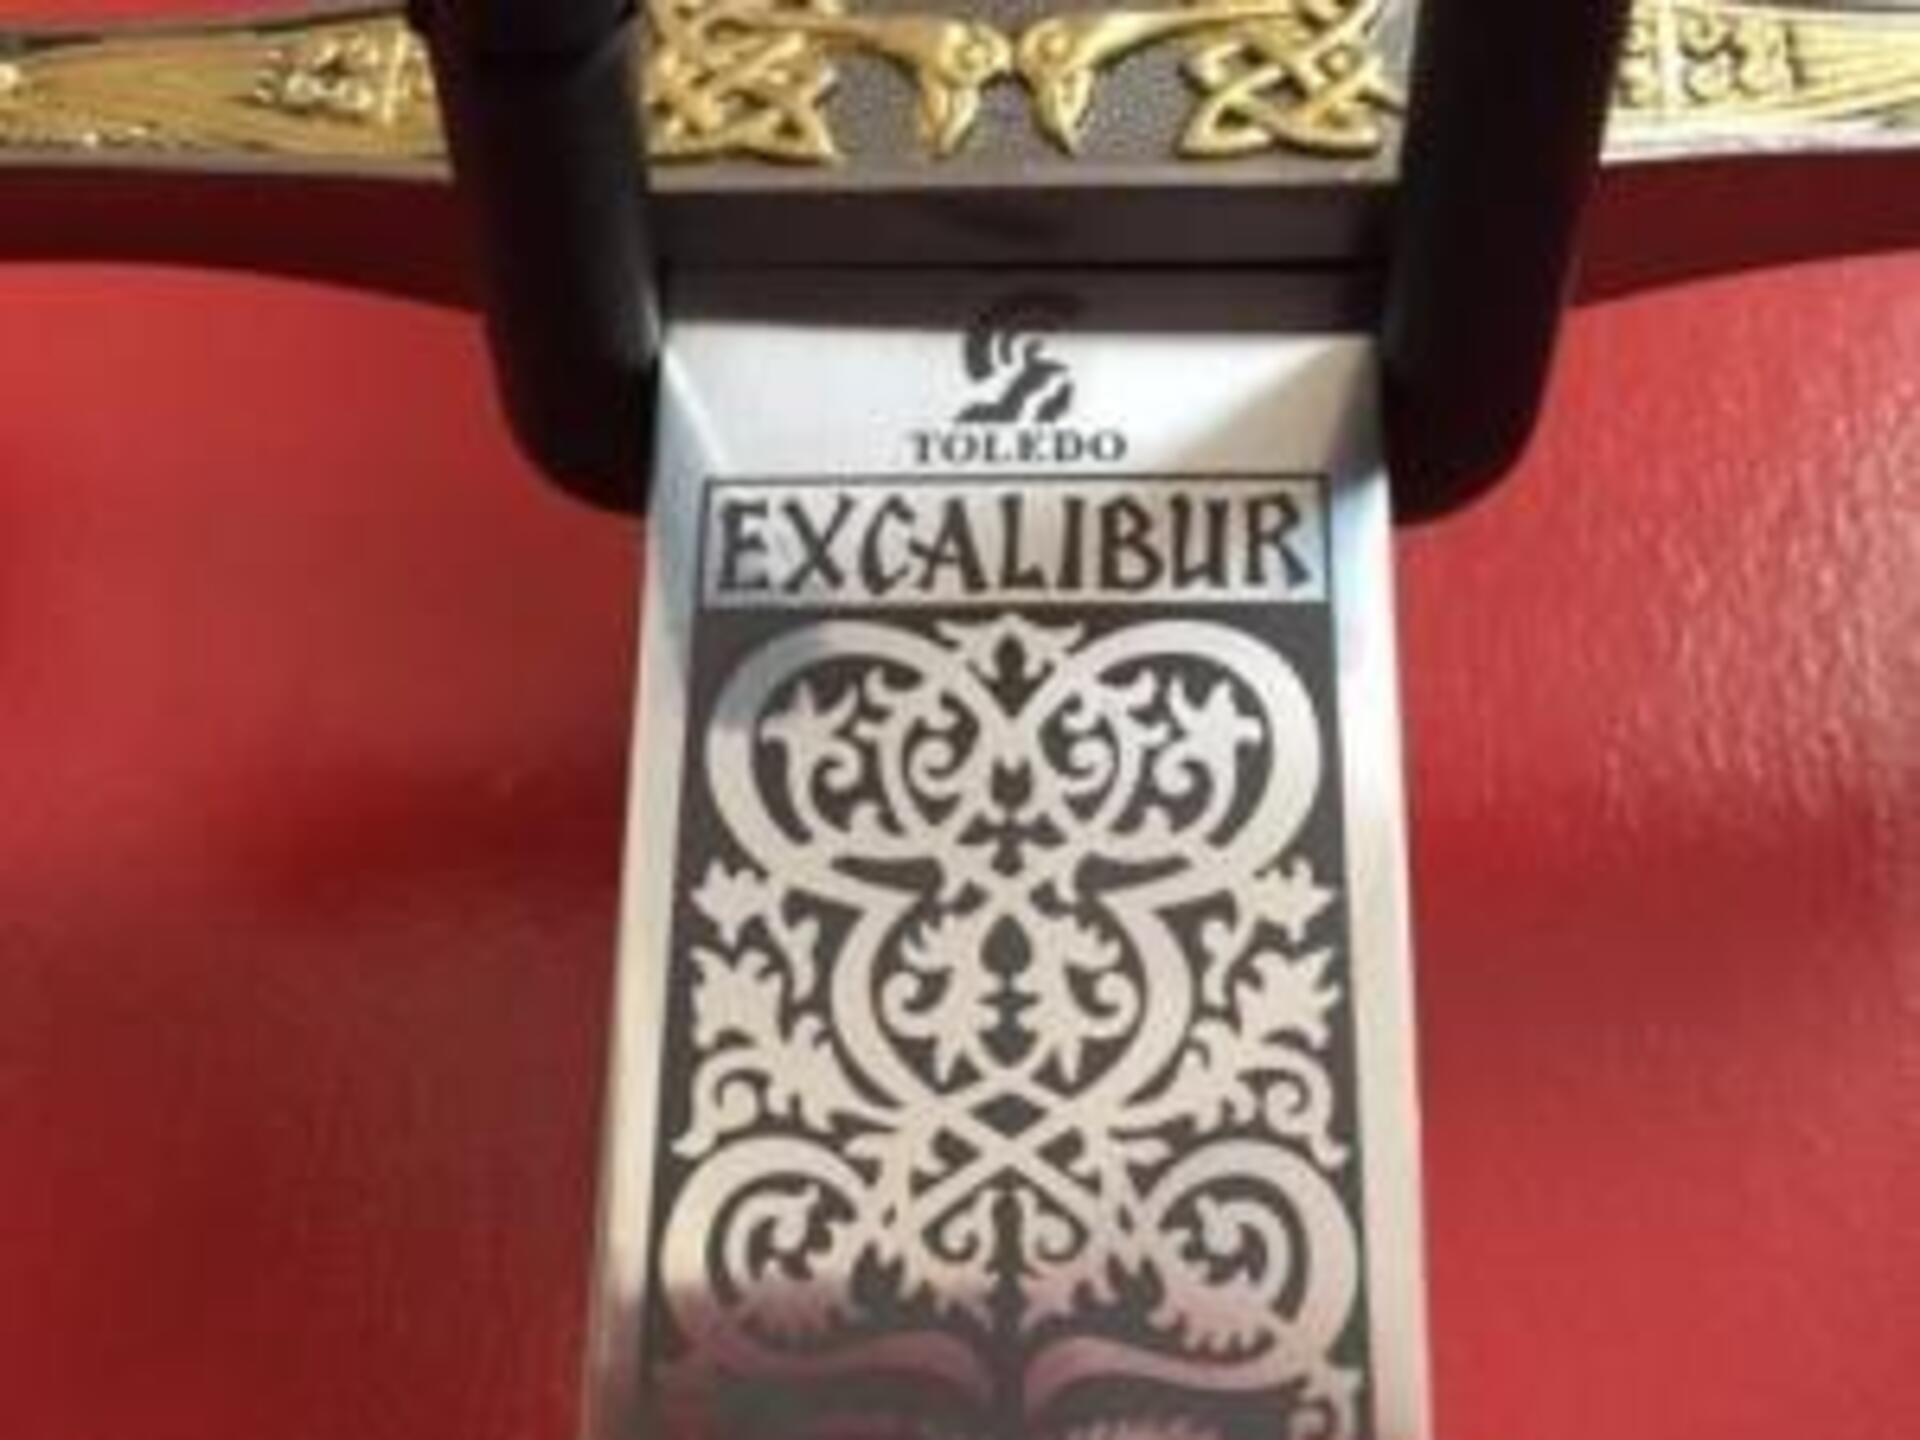 Excalibur Sword, one of many swords available